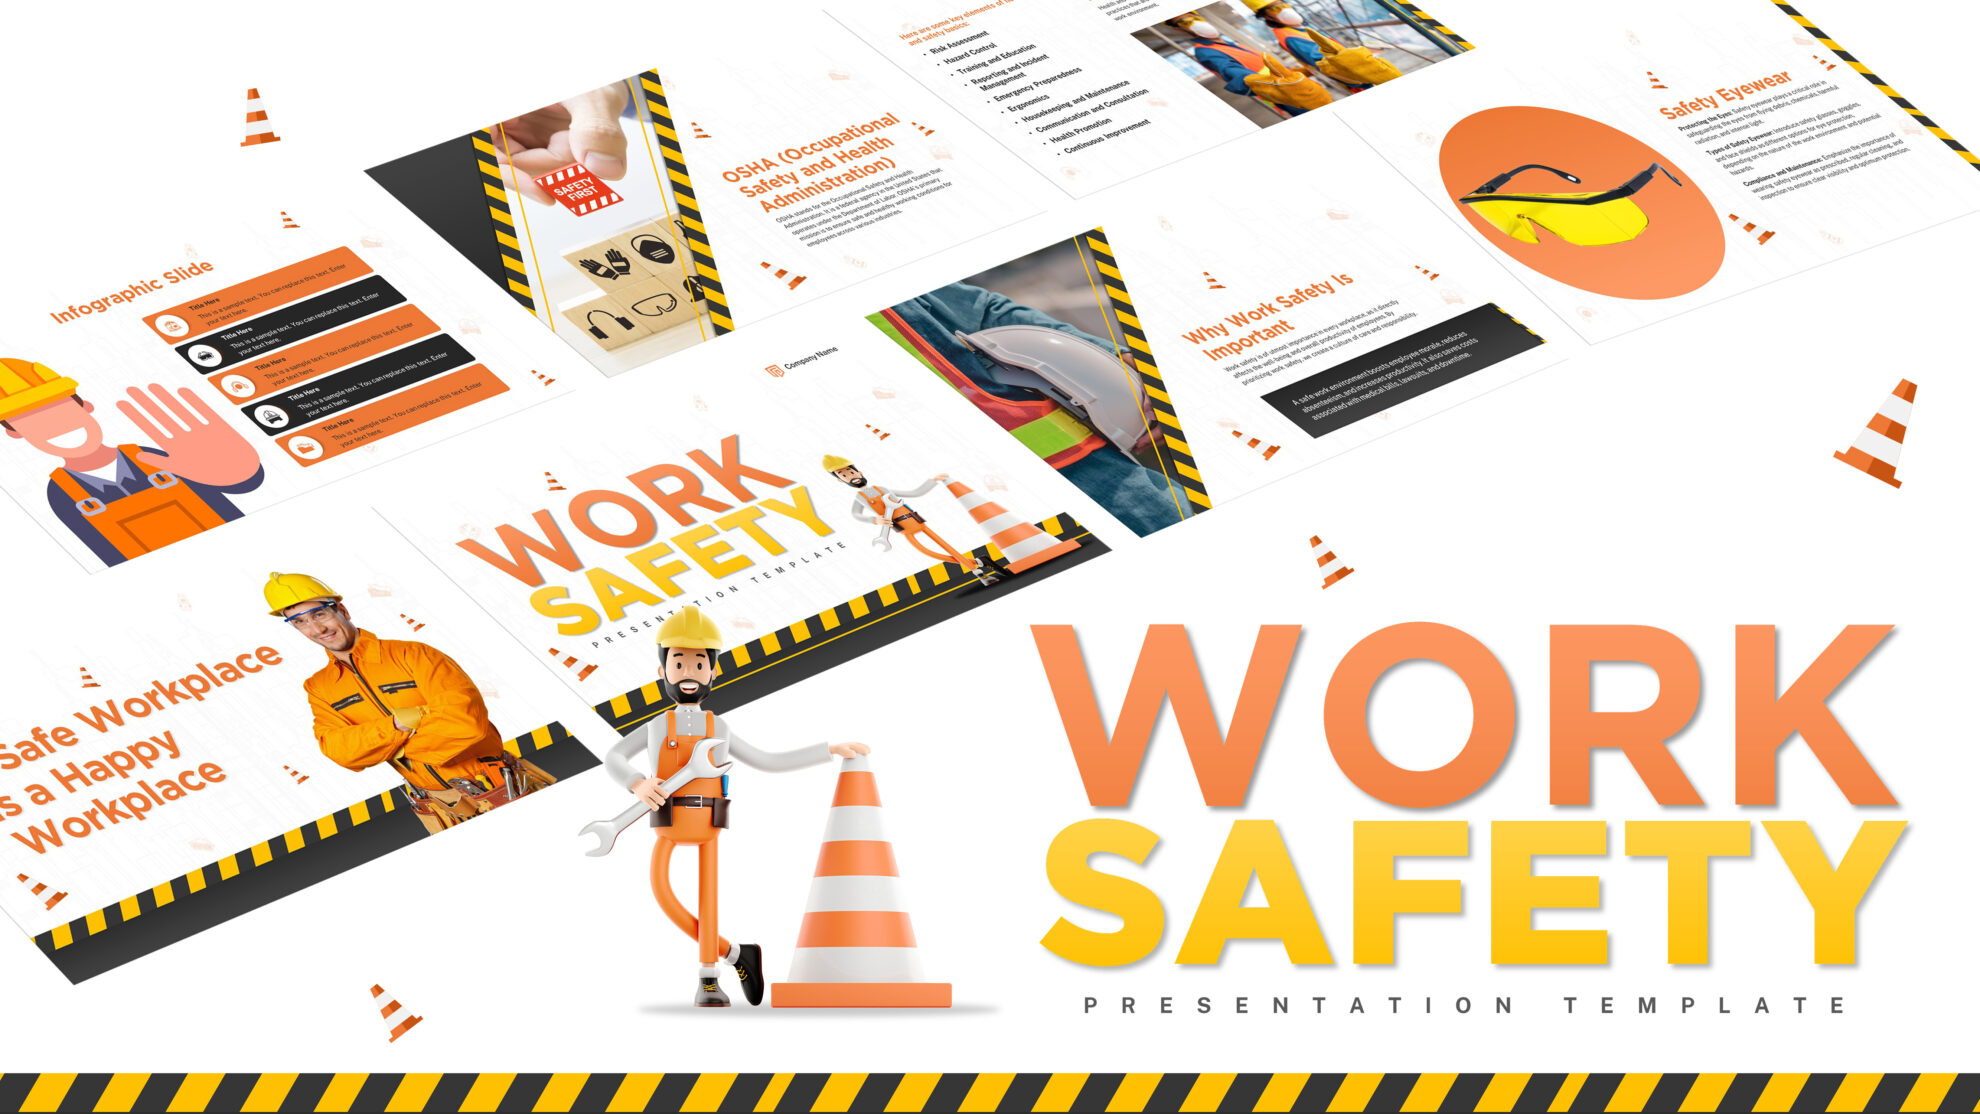 Work Safety PowerPoint Template Deck Cover Image